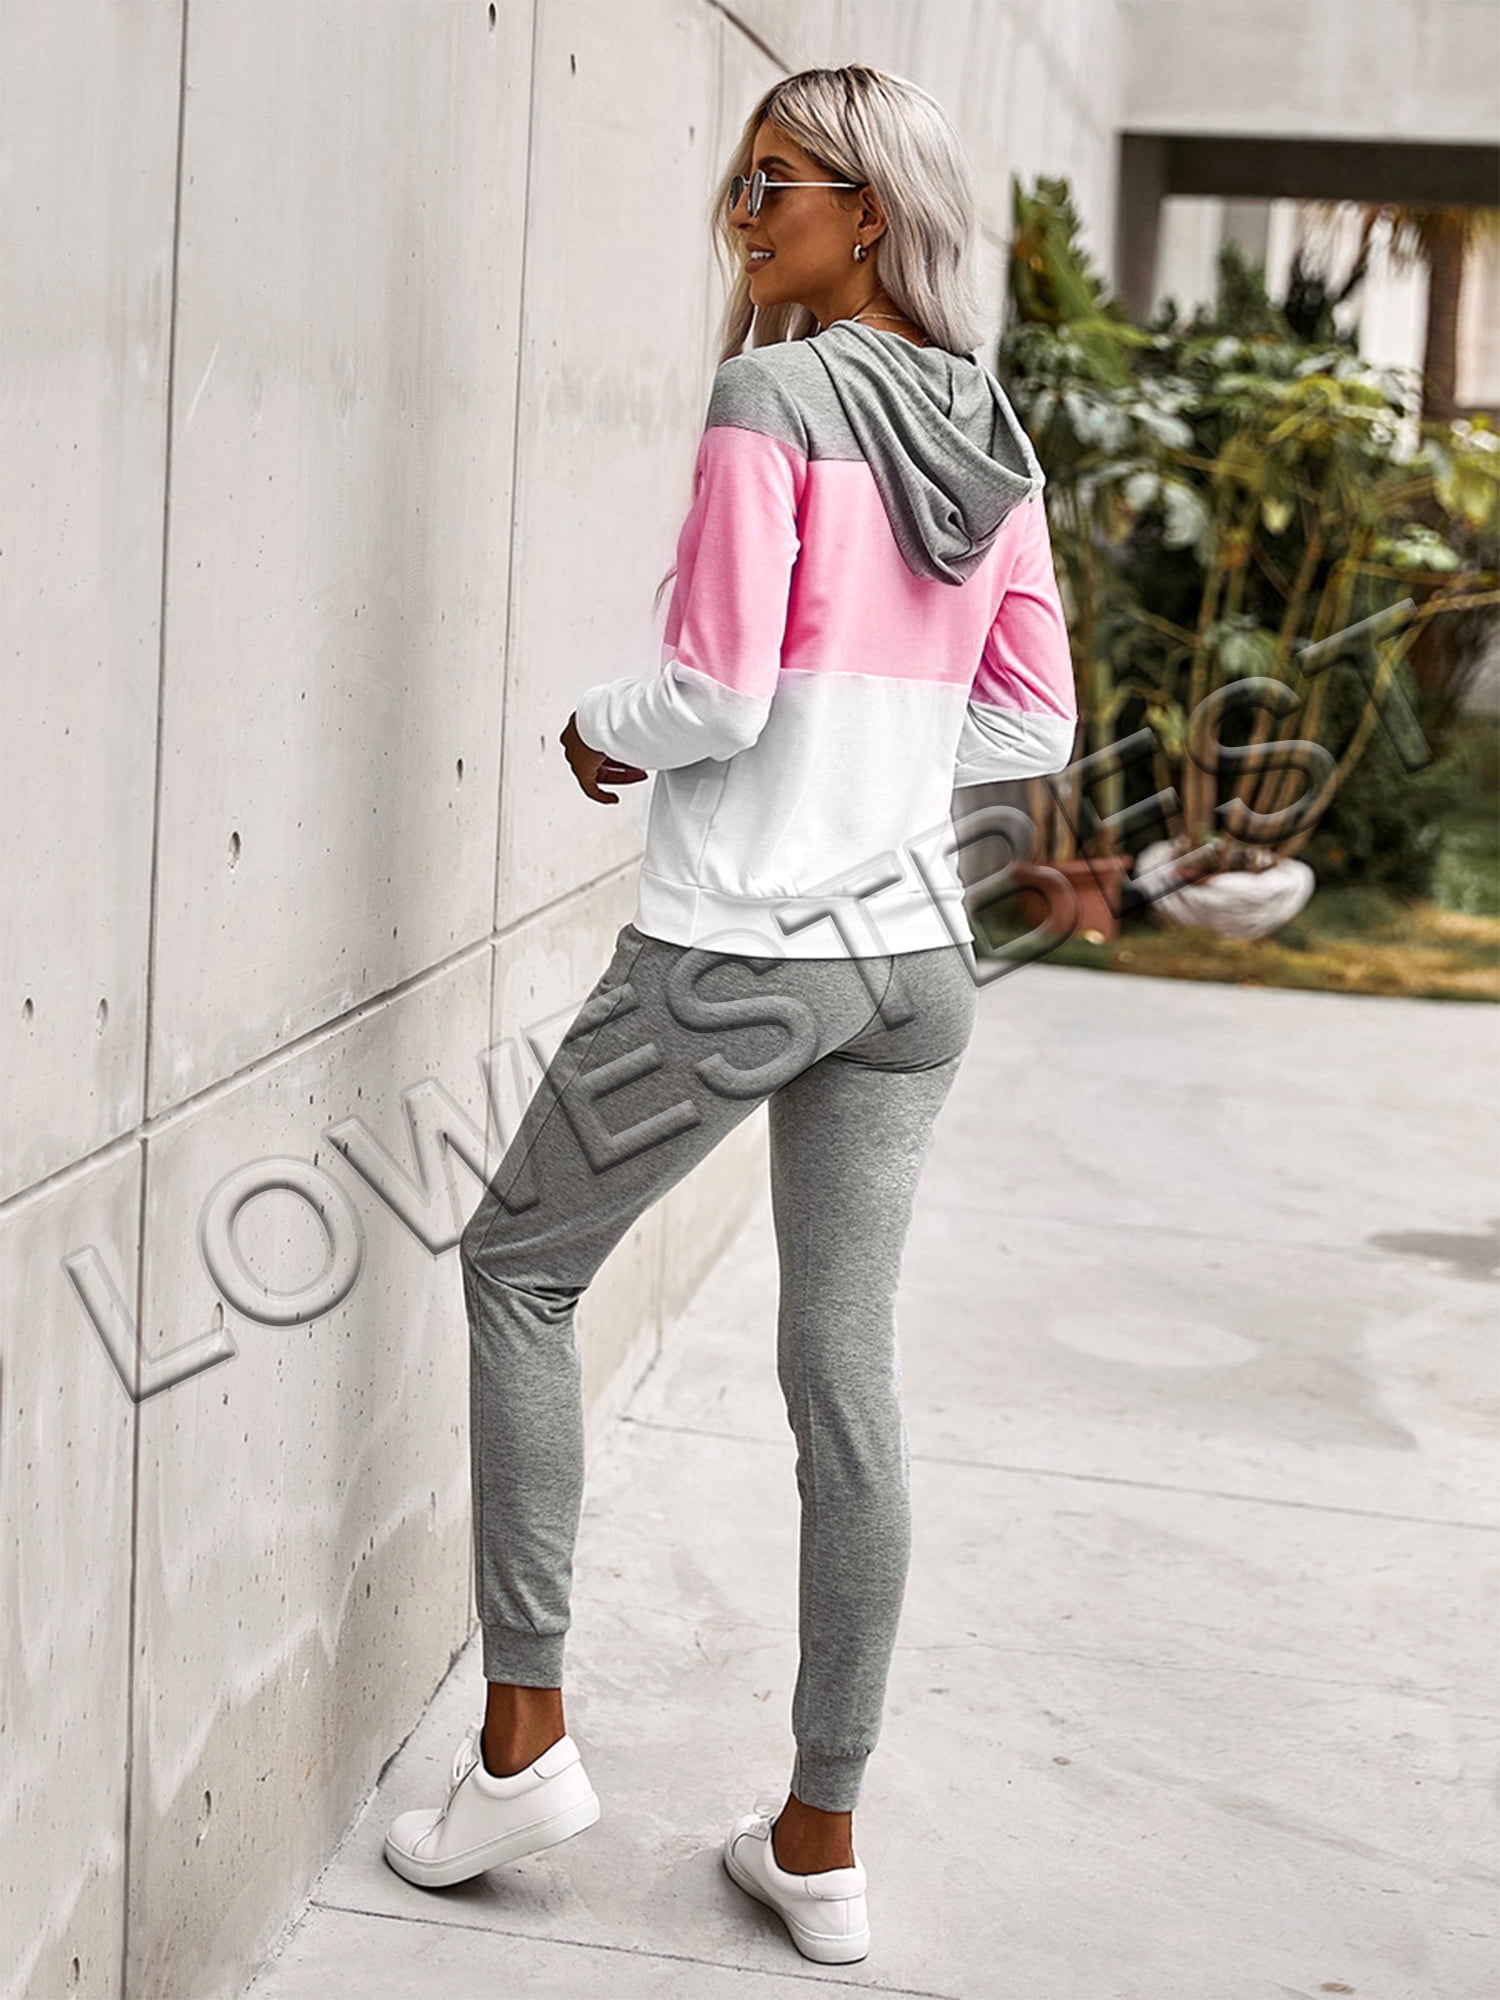 Casual Graphic Ladies Joggers Jogging Tracksuit Bottoms Grey with Fushia Large Eye Catch